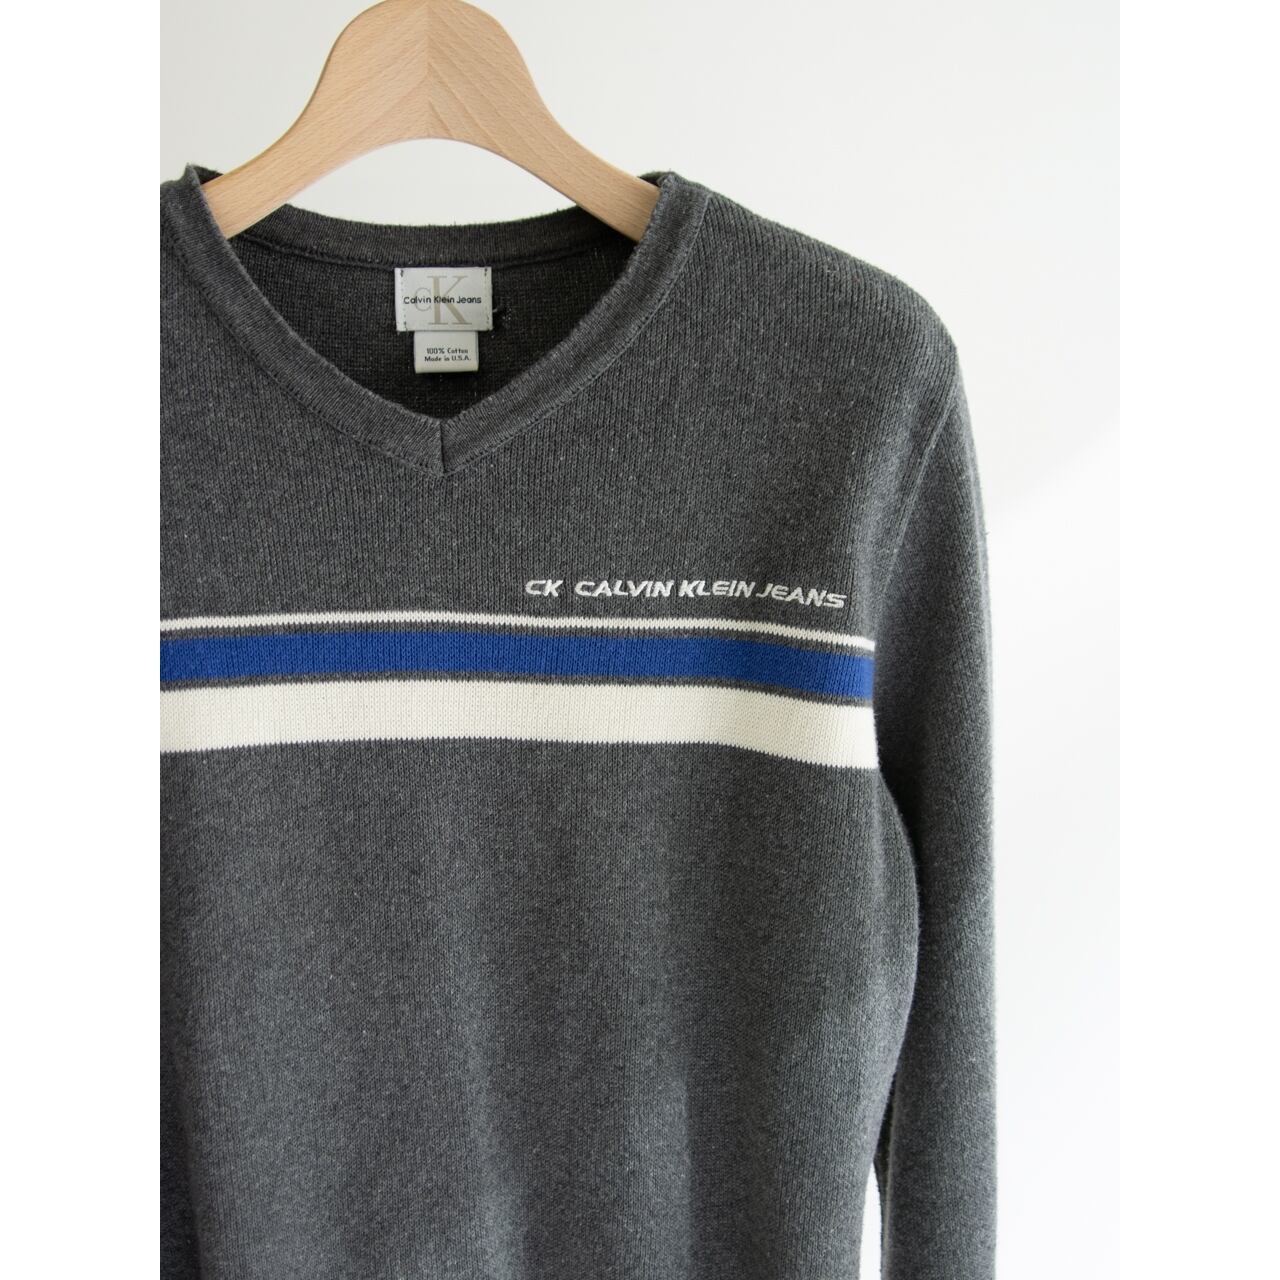 Calvin Klein Jeans】Made in U.S.A. 100% Cotton V-Neck Sweater